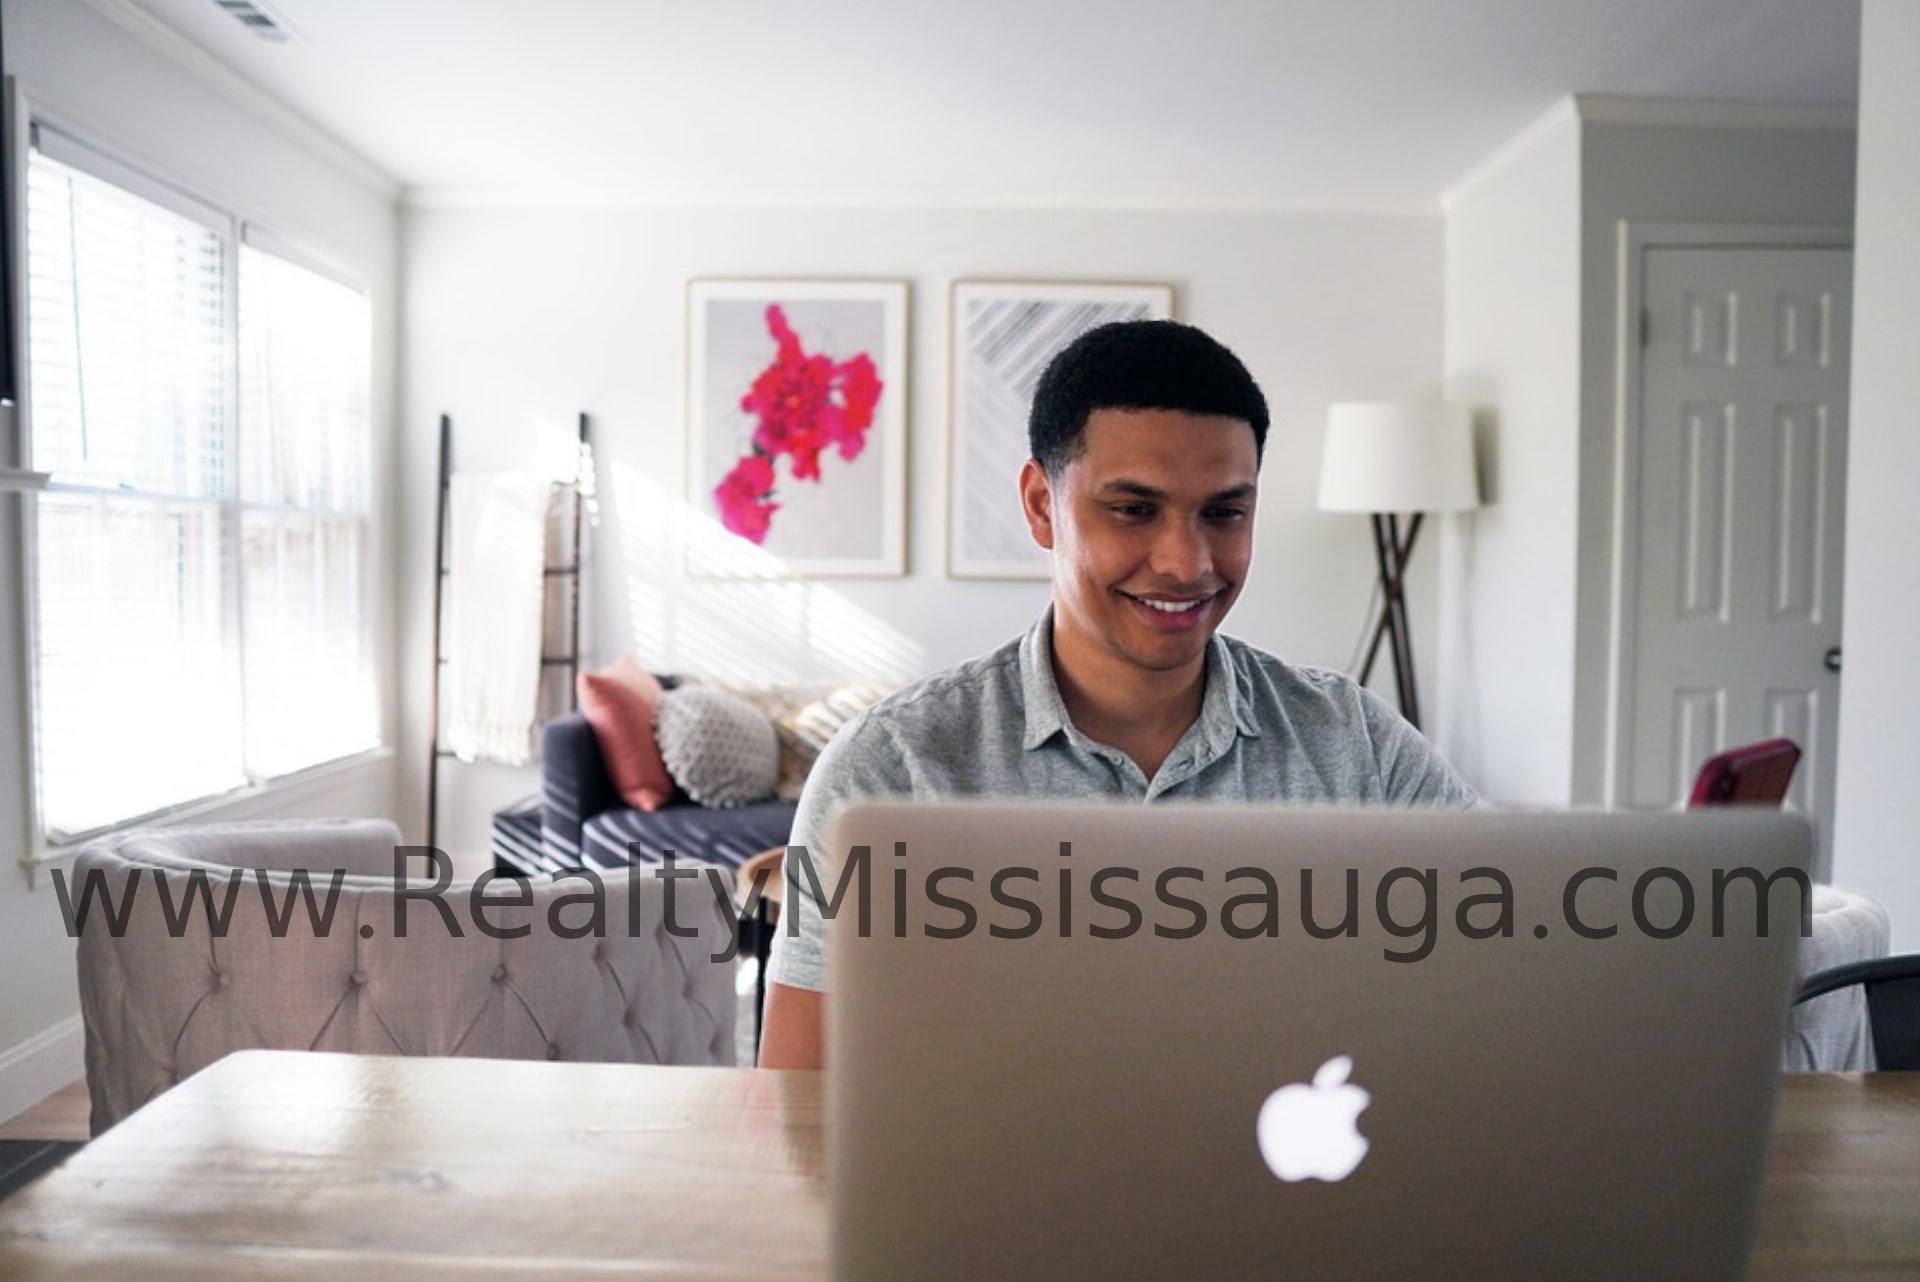 You are currently viewing How do you find the best property brokerage services in Mississauga?